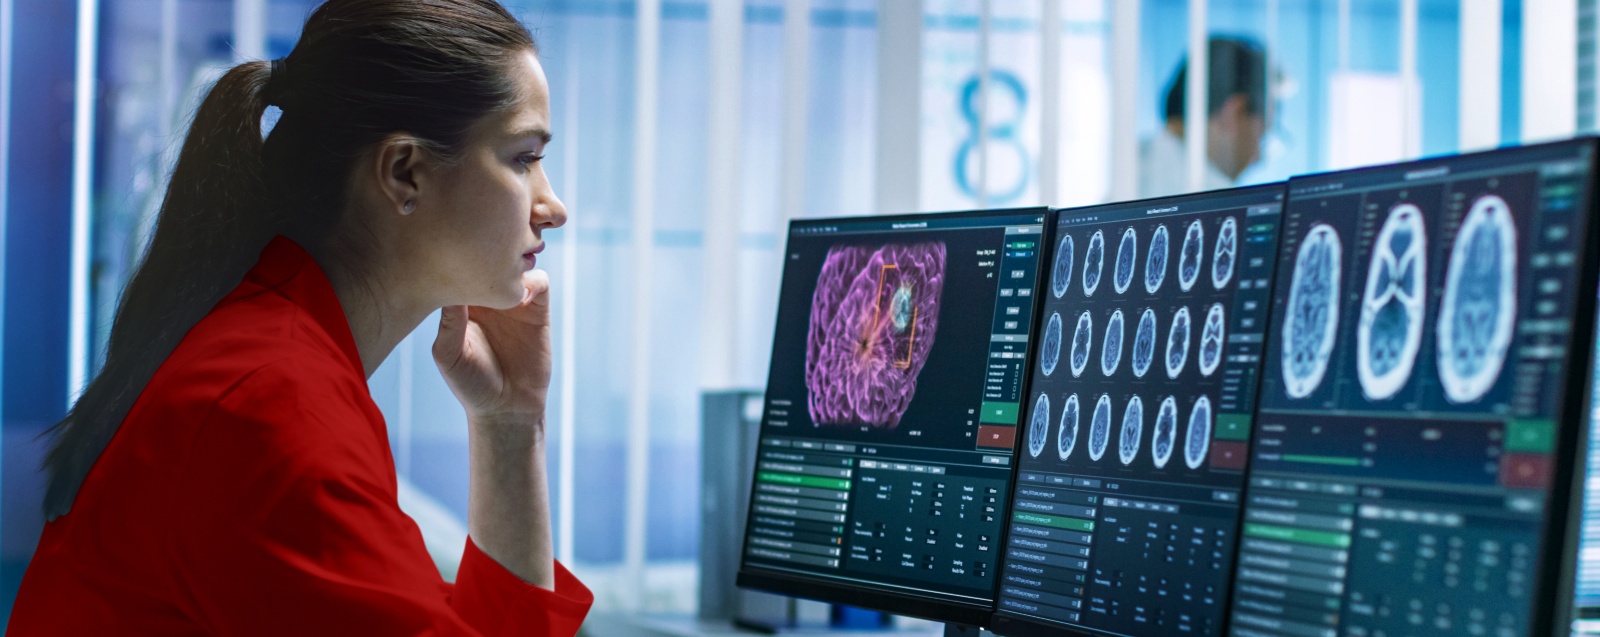 Data-Driven Diagnosis and Treatment for Brain Injury & Disease Research